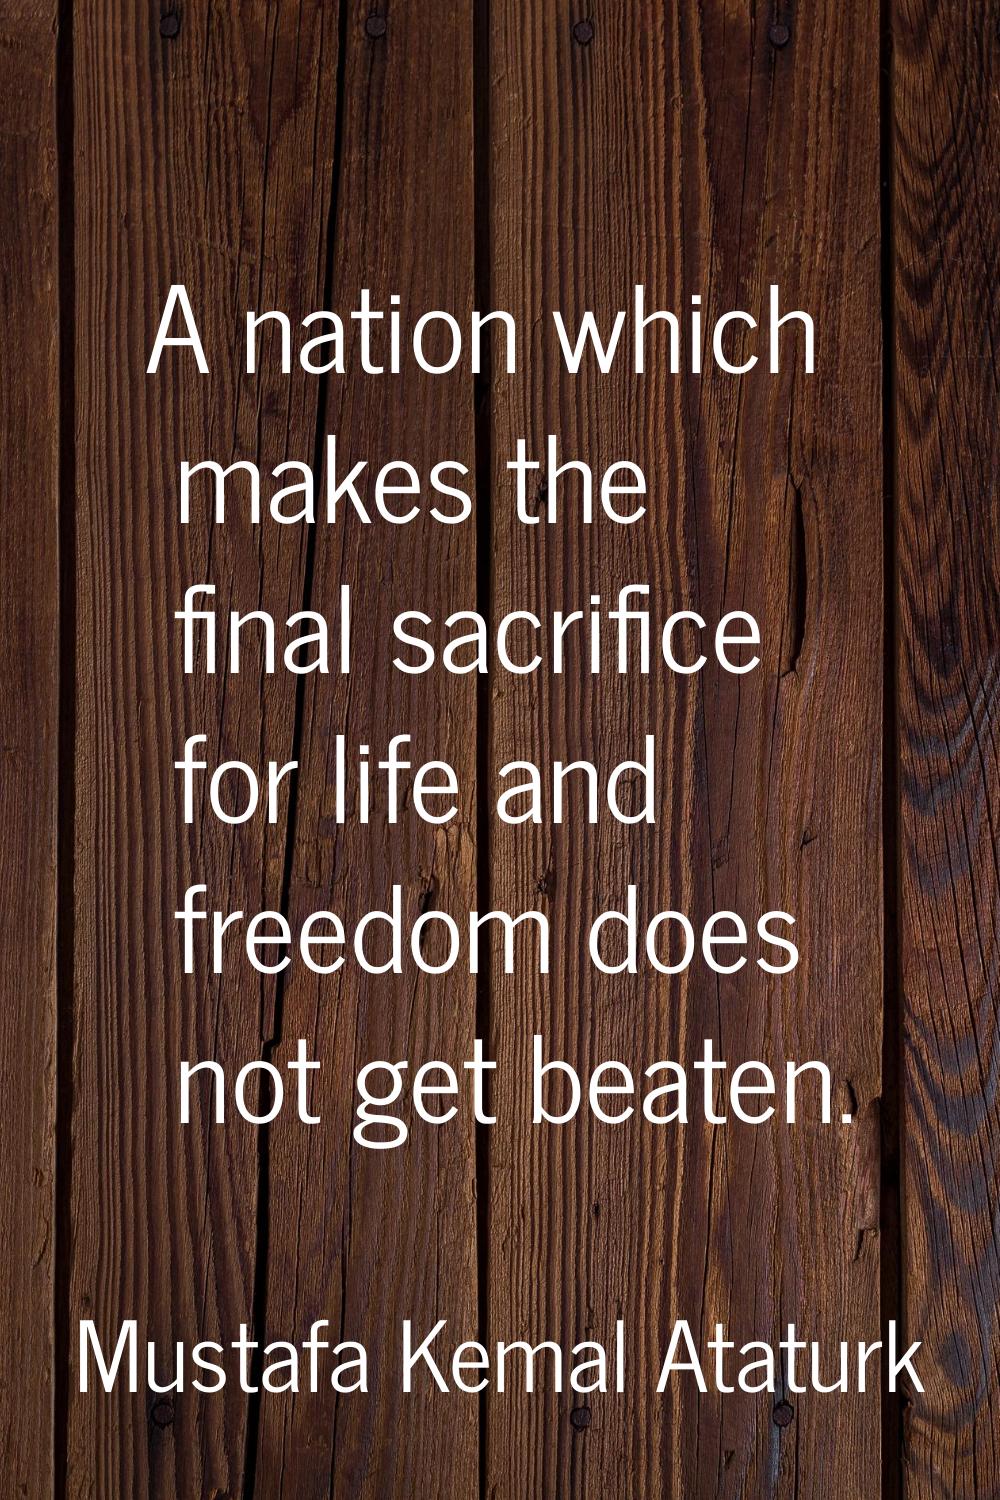 A nation which makes the final sacrifice for life and freedom does not get beaten.